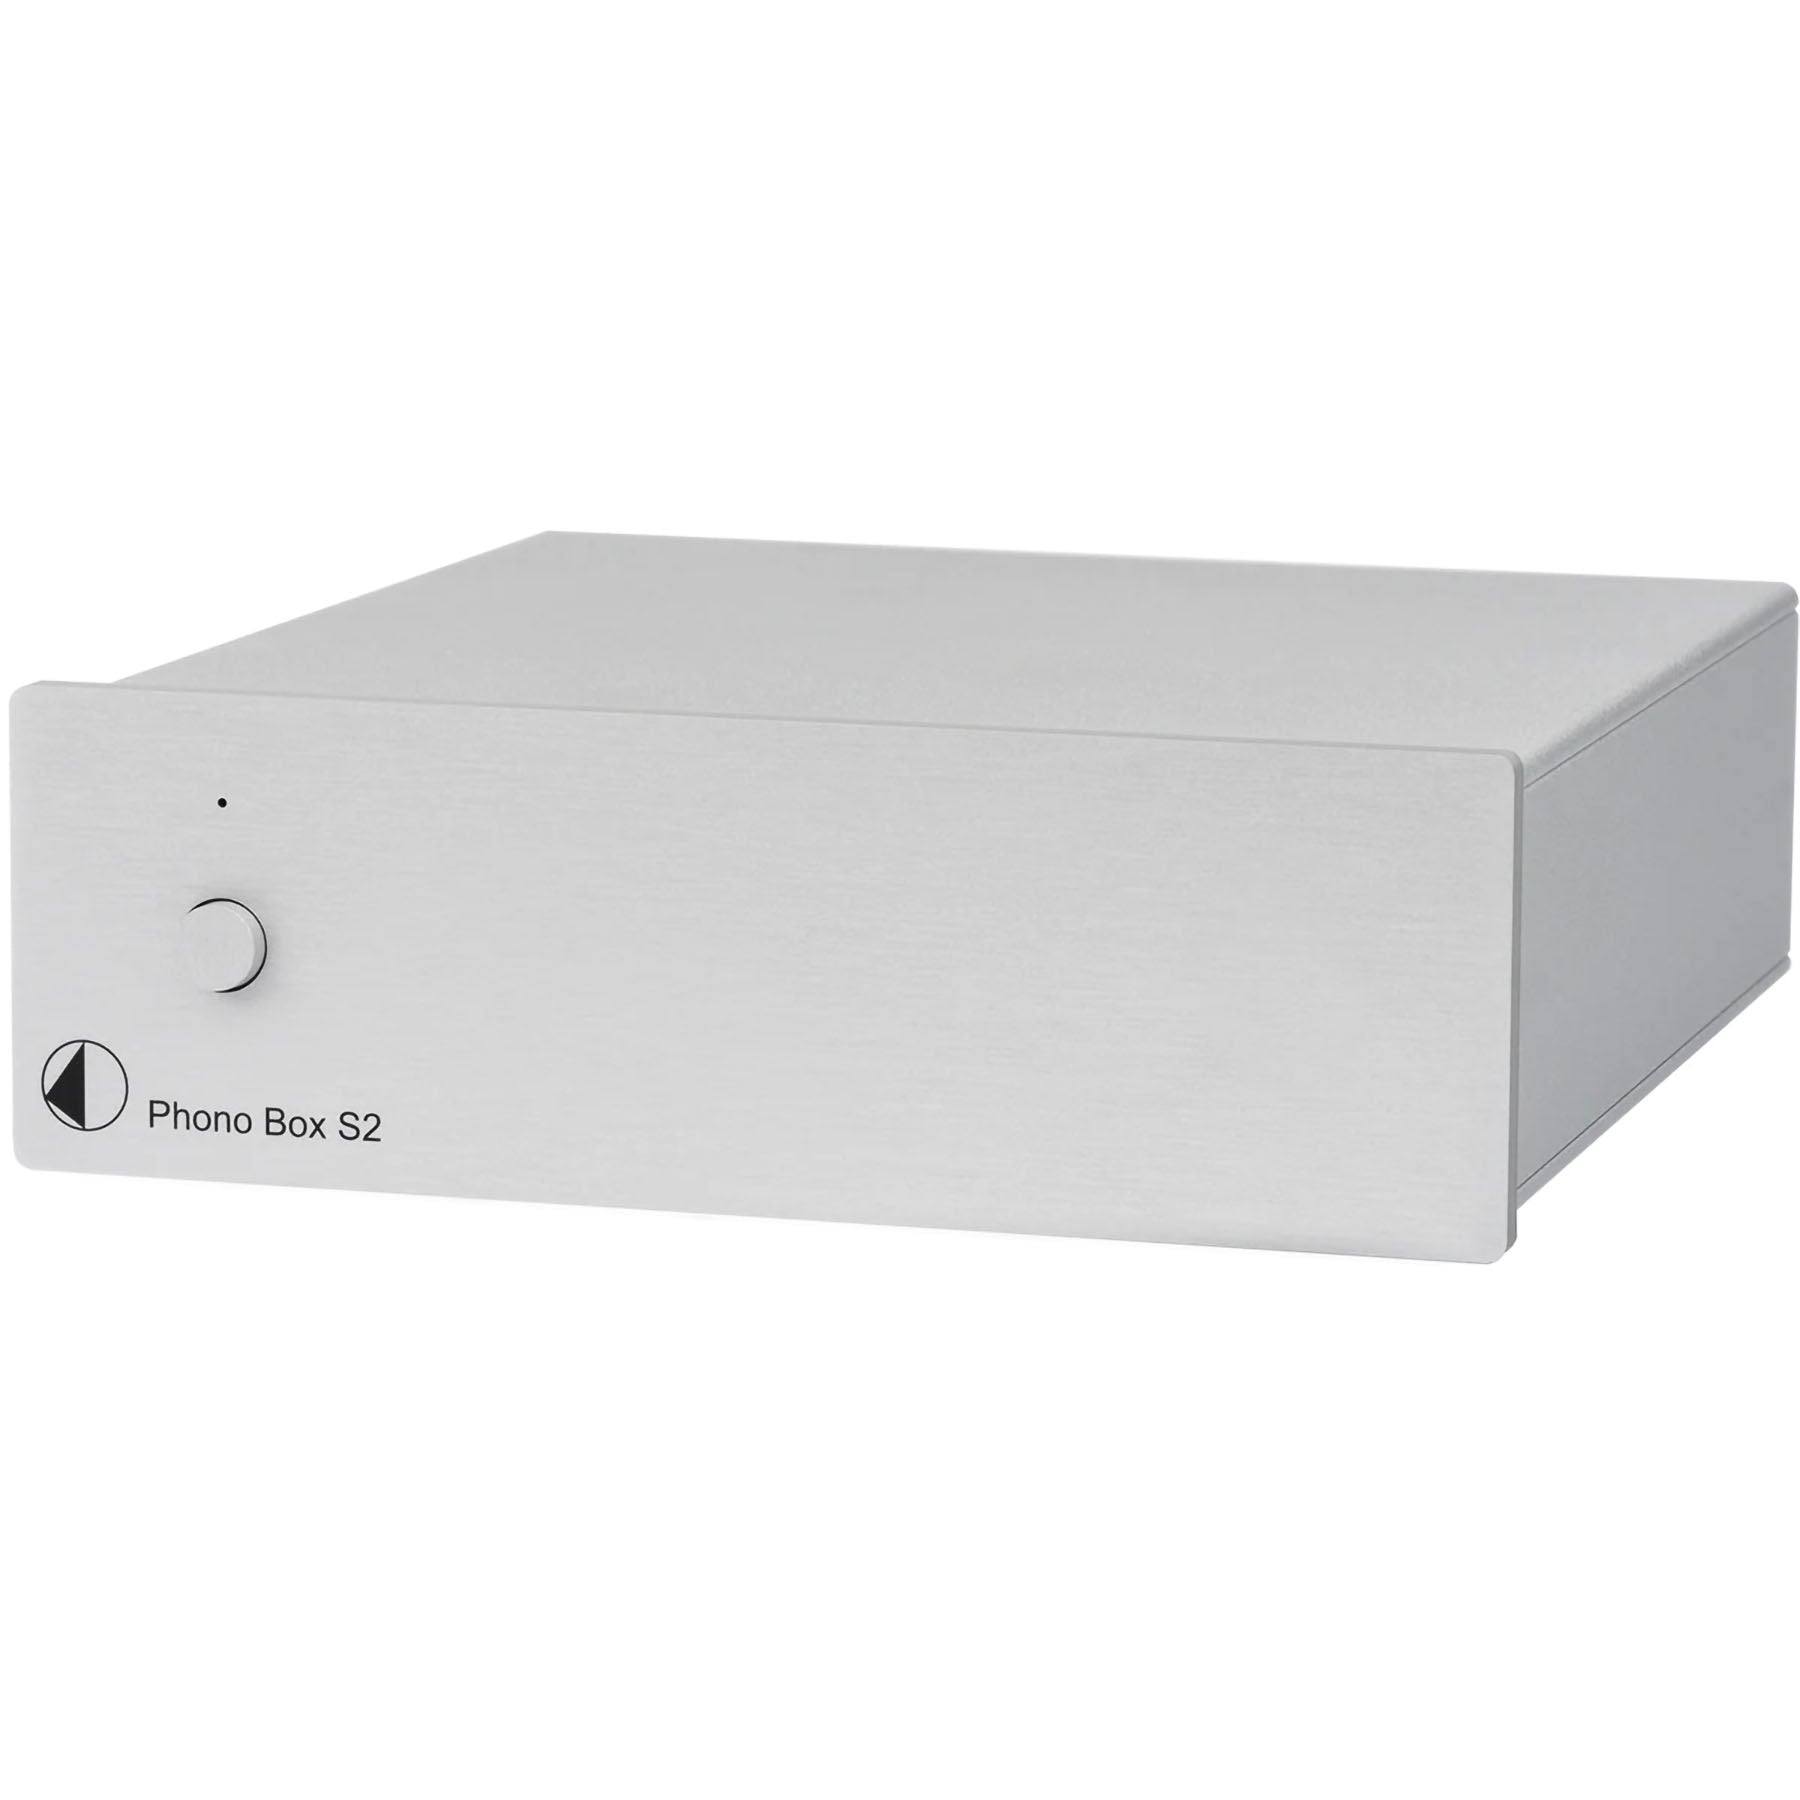 Pro-Ject Stereo Box S2 BT Integrated Amplifier with Bluetooth